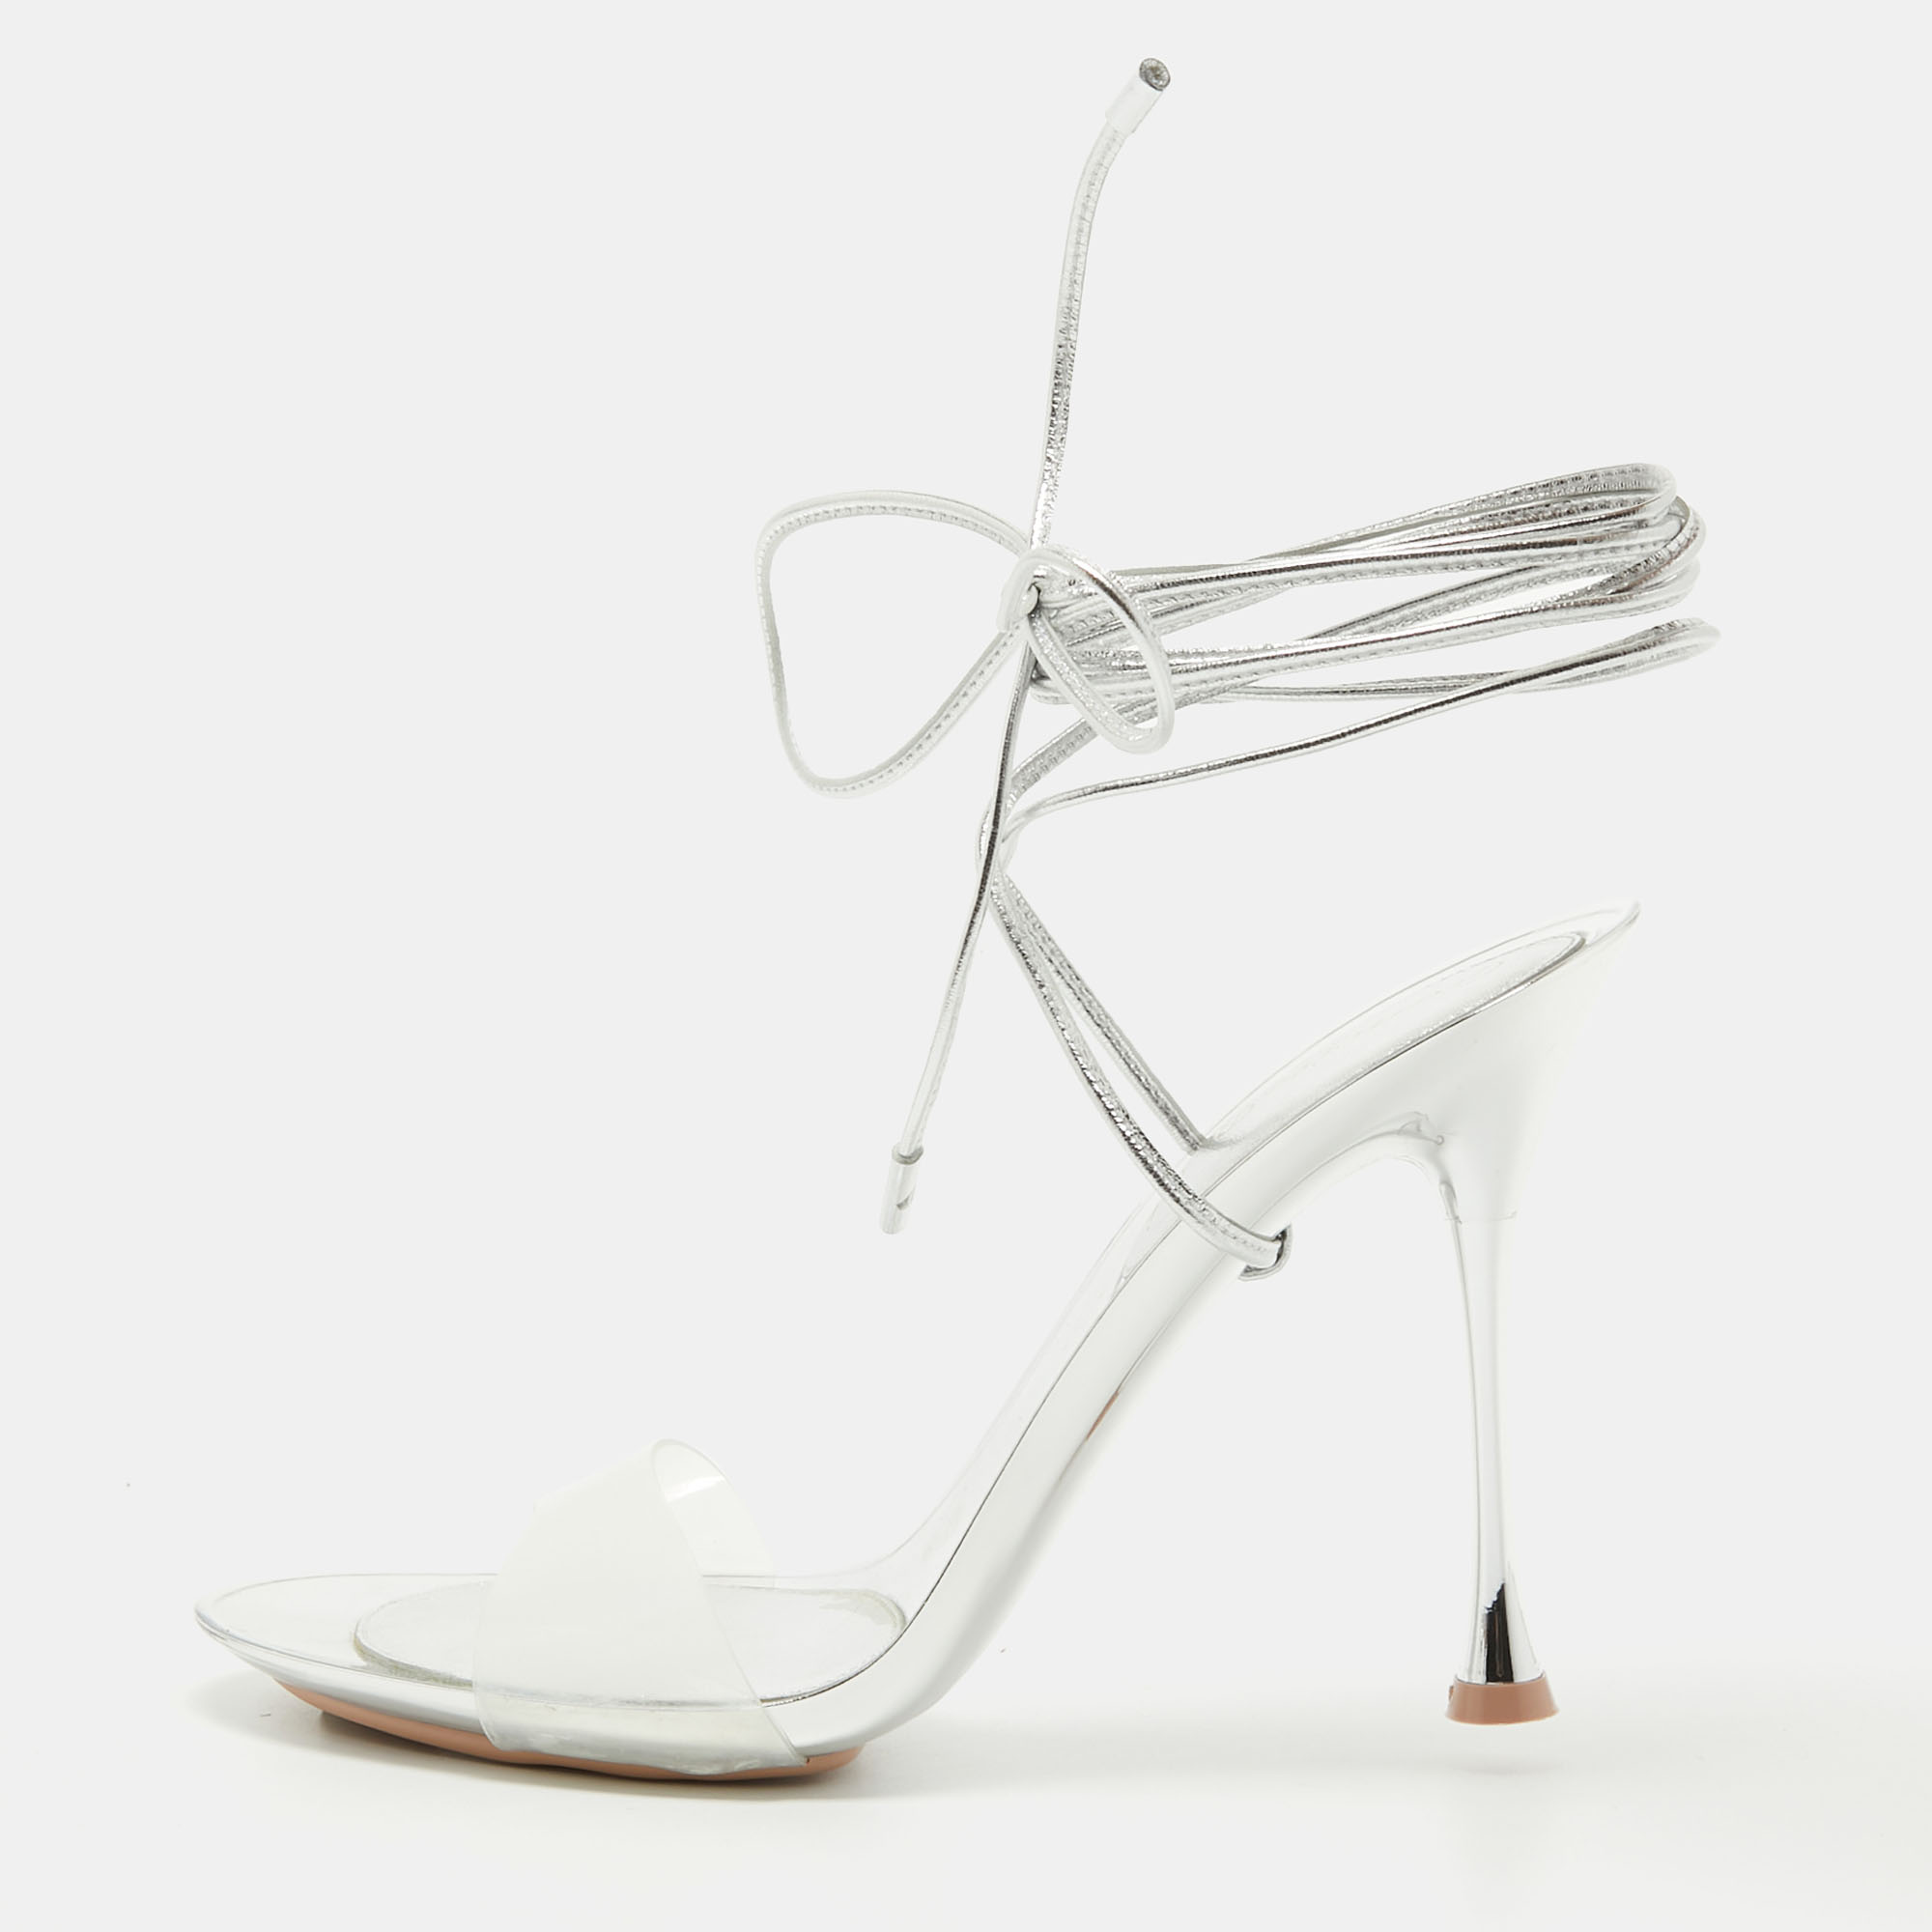 Gianvito rossi transparent pvc and leather spice sandals size 40